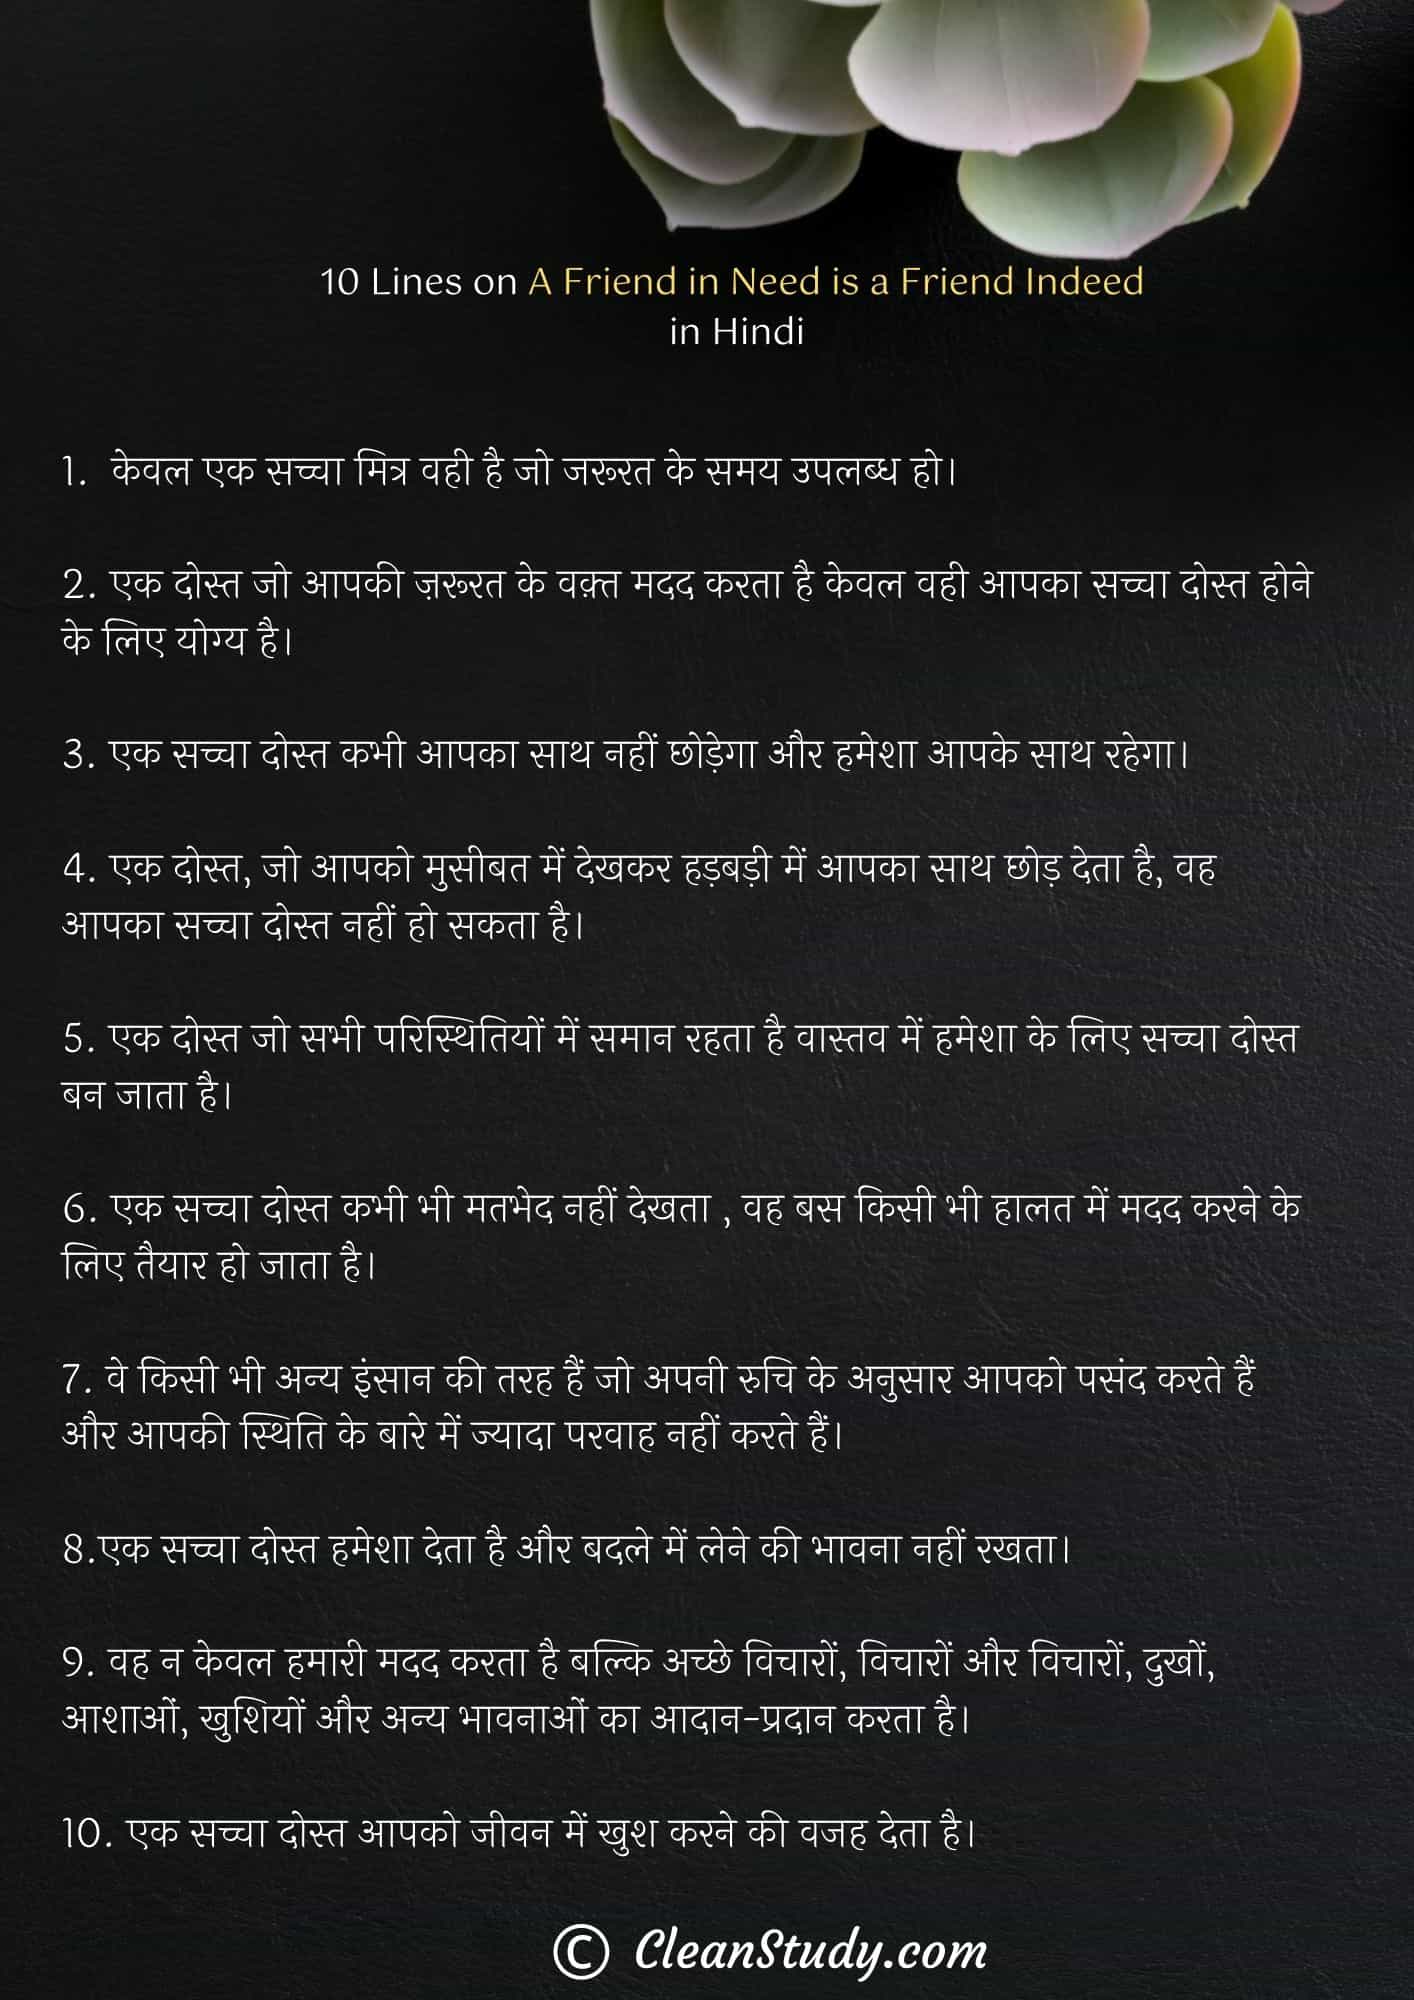 10 Lines on A Friend in Need is a Friend Indeed in Hindi